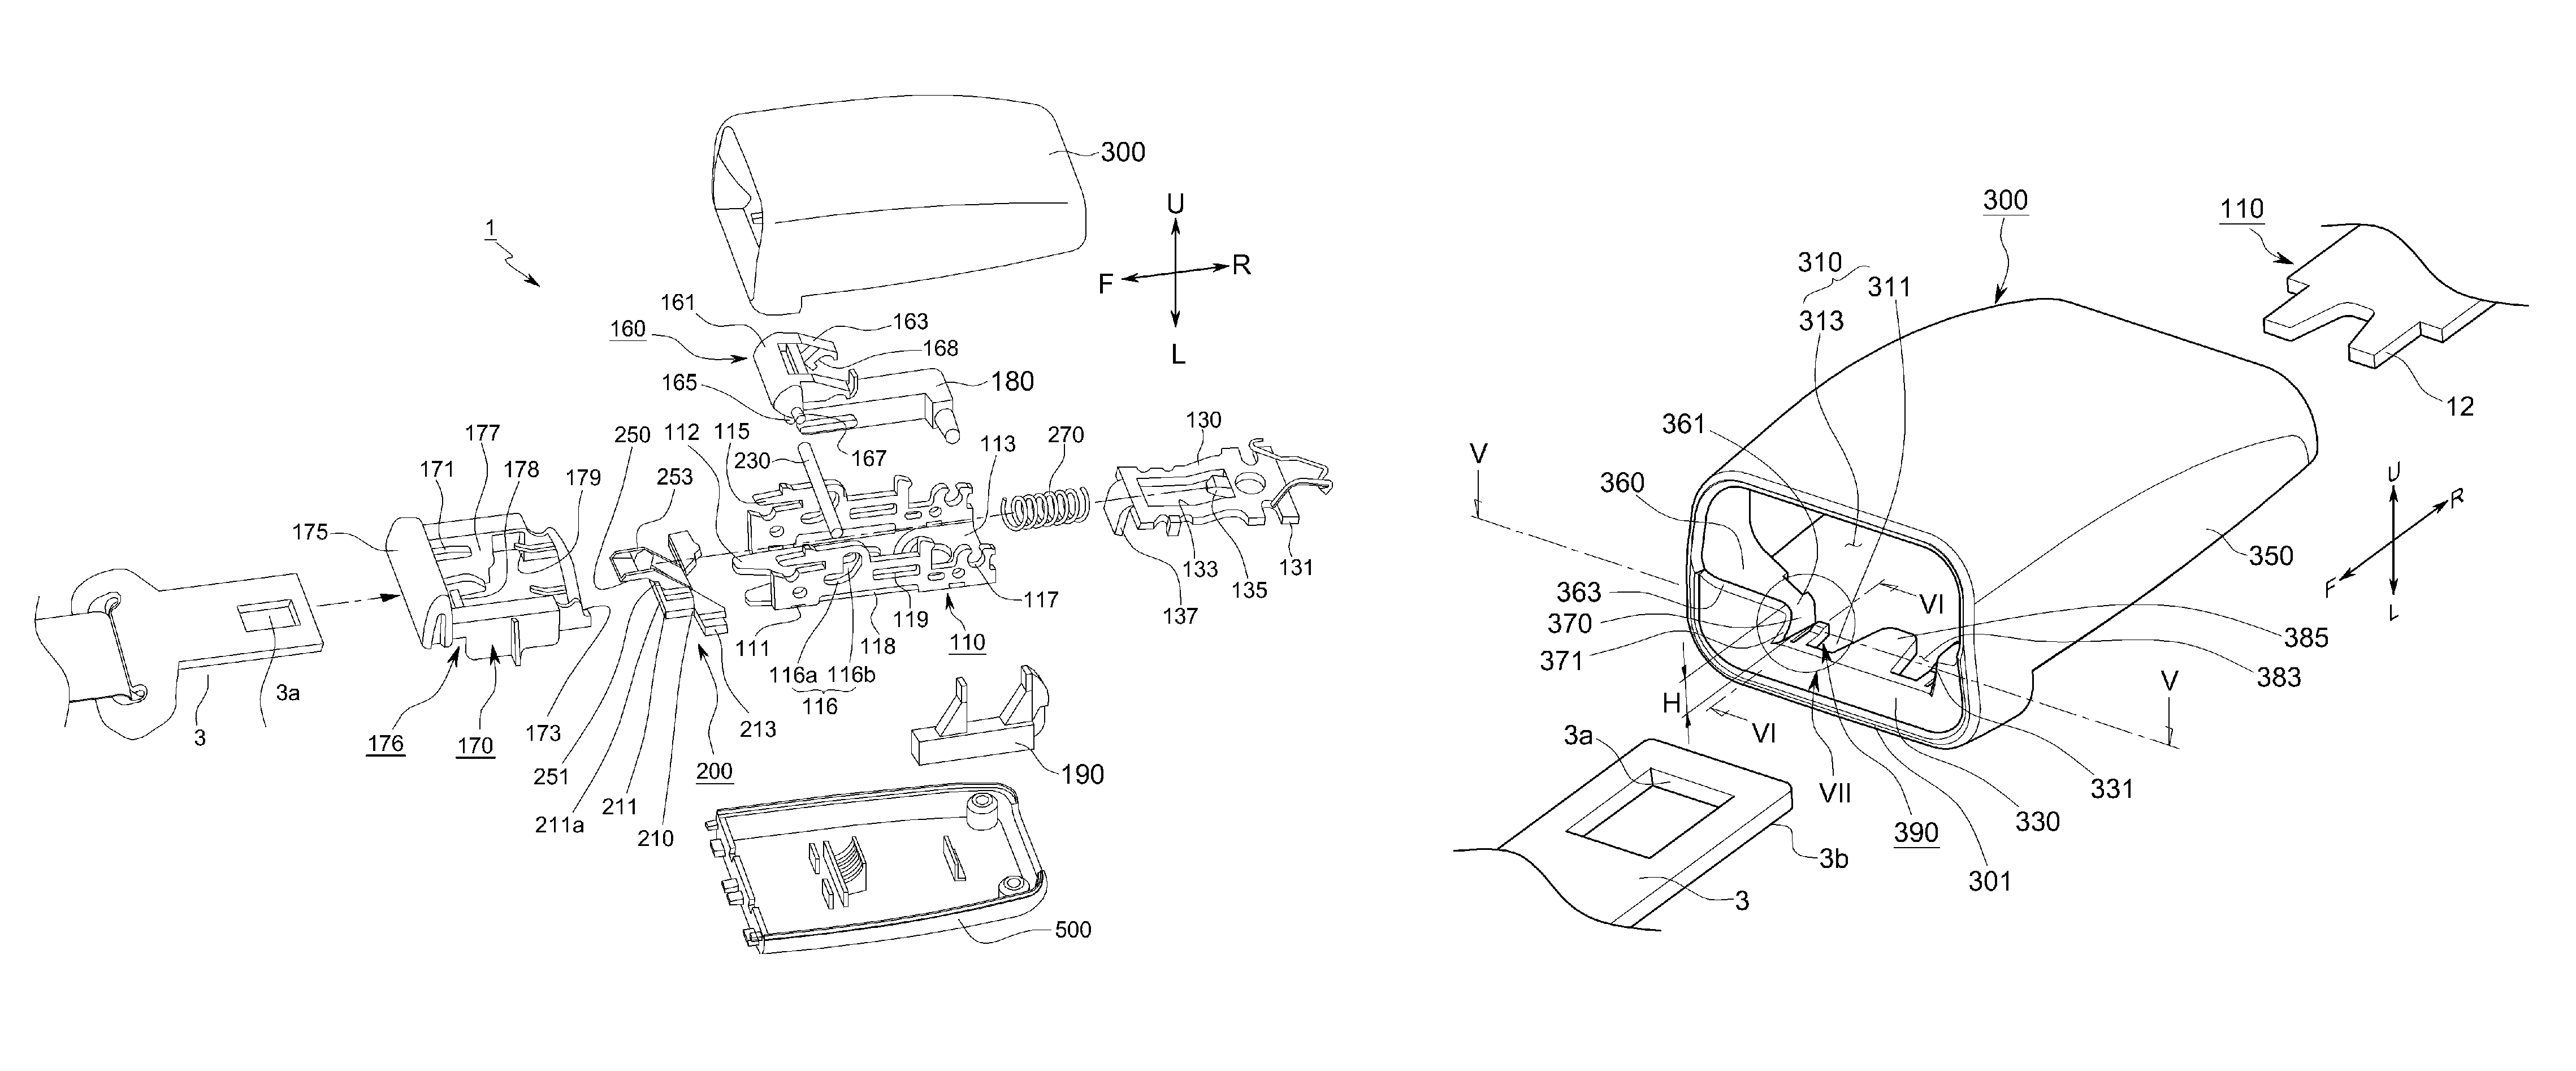 Buckle apparatus for seat belt